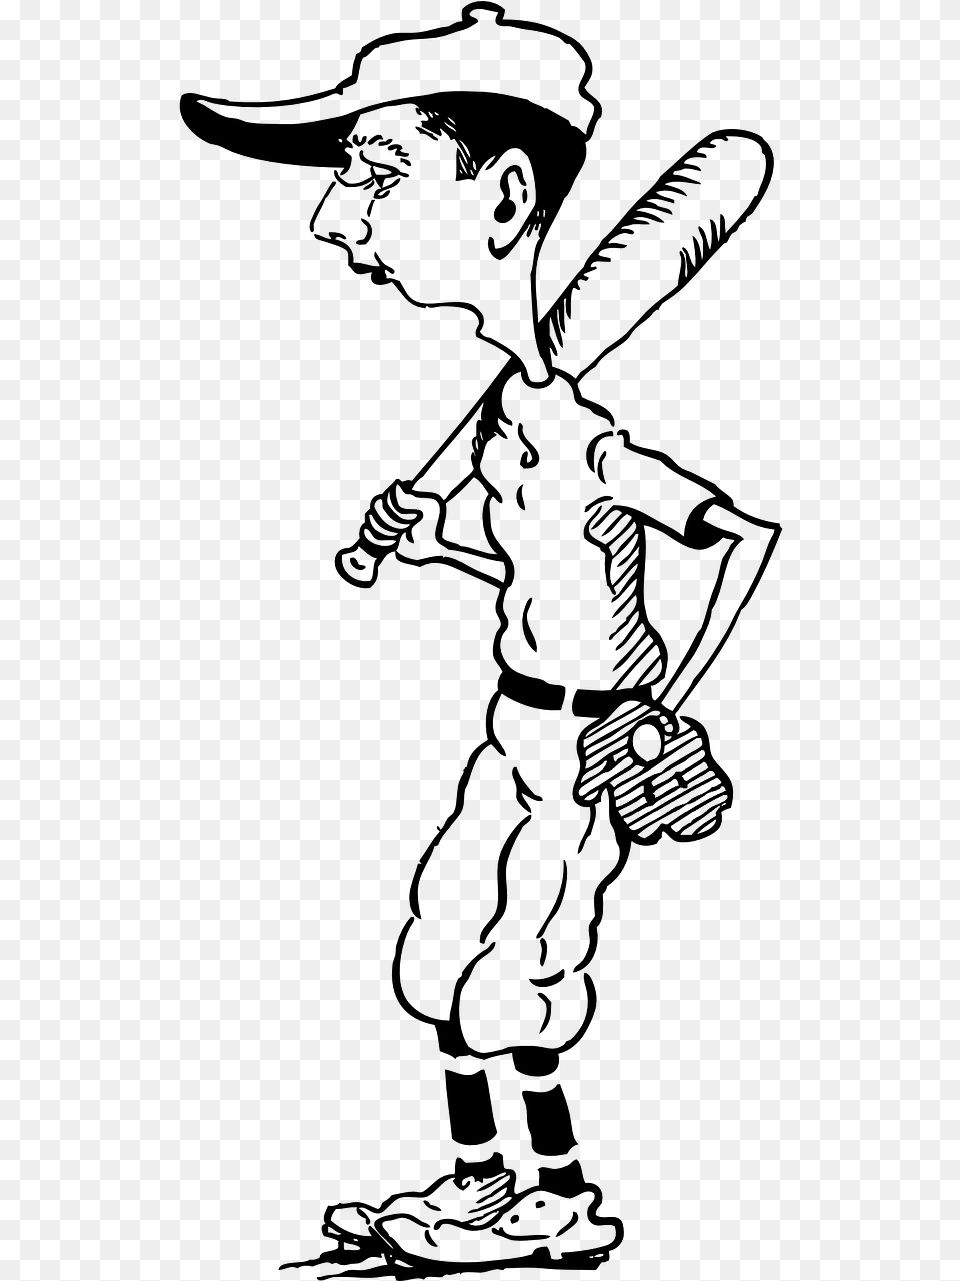 Old Baseball Player Cartoon Black And White, Gray Free Transparent Png